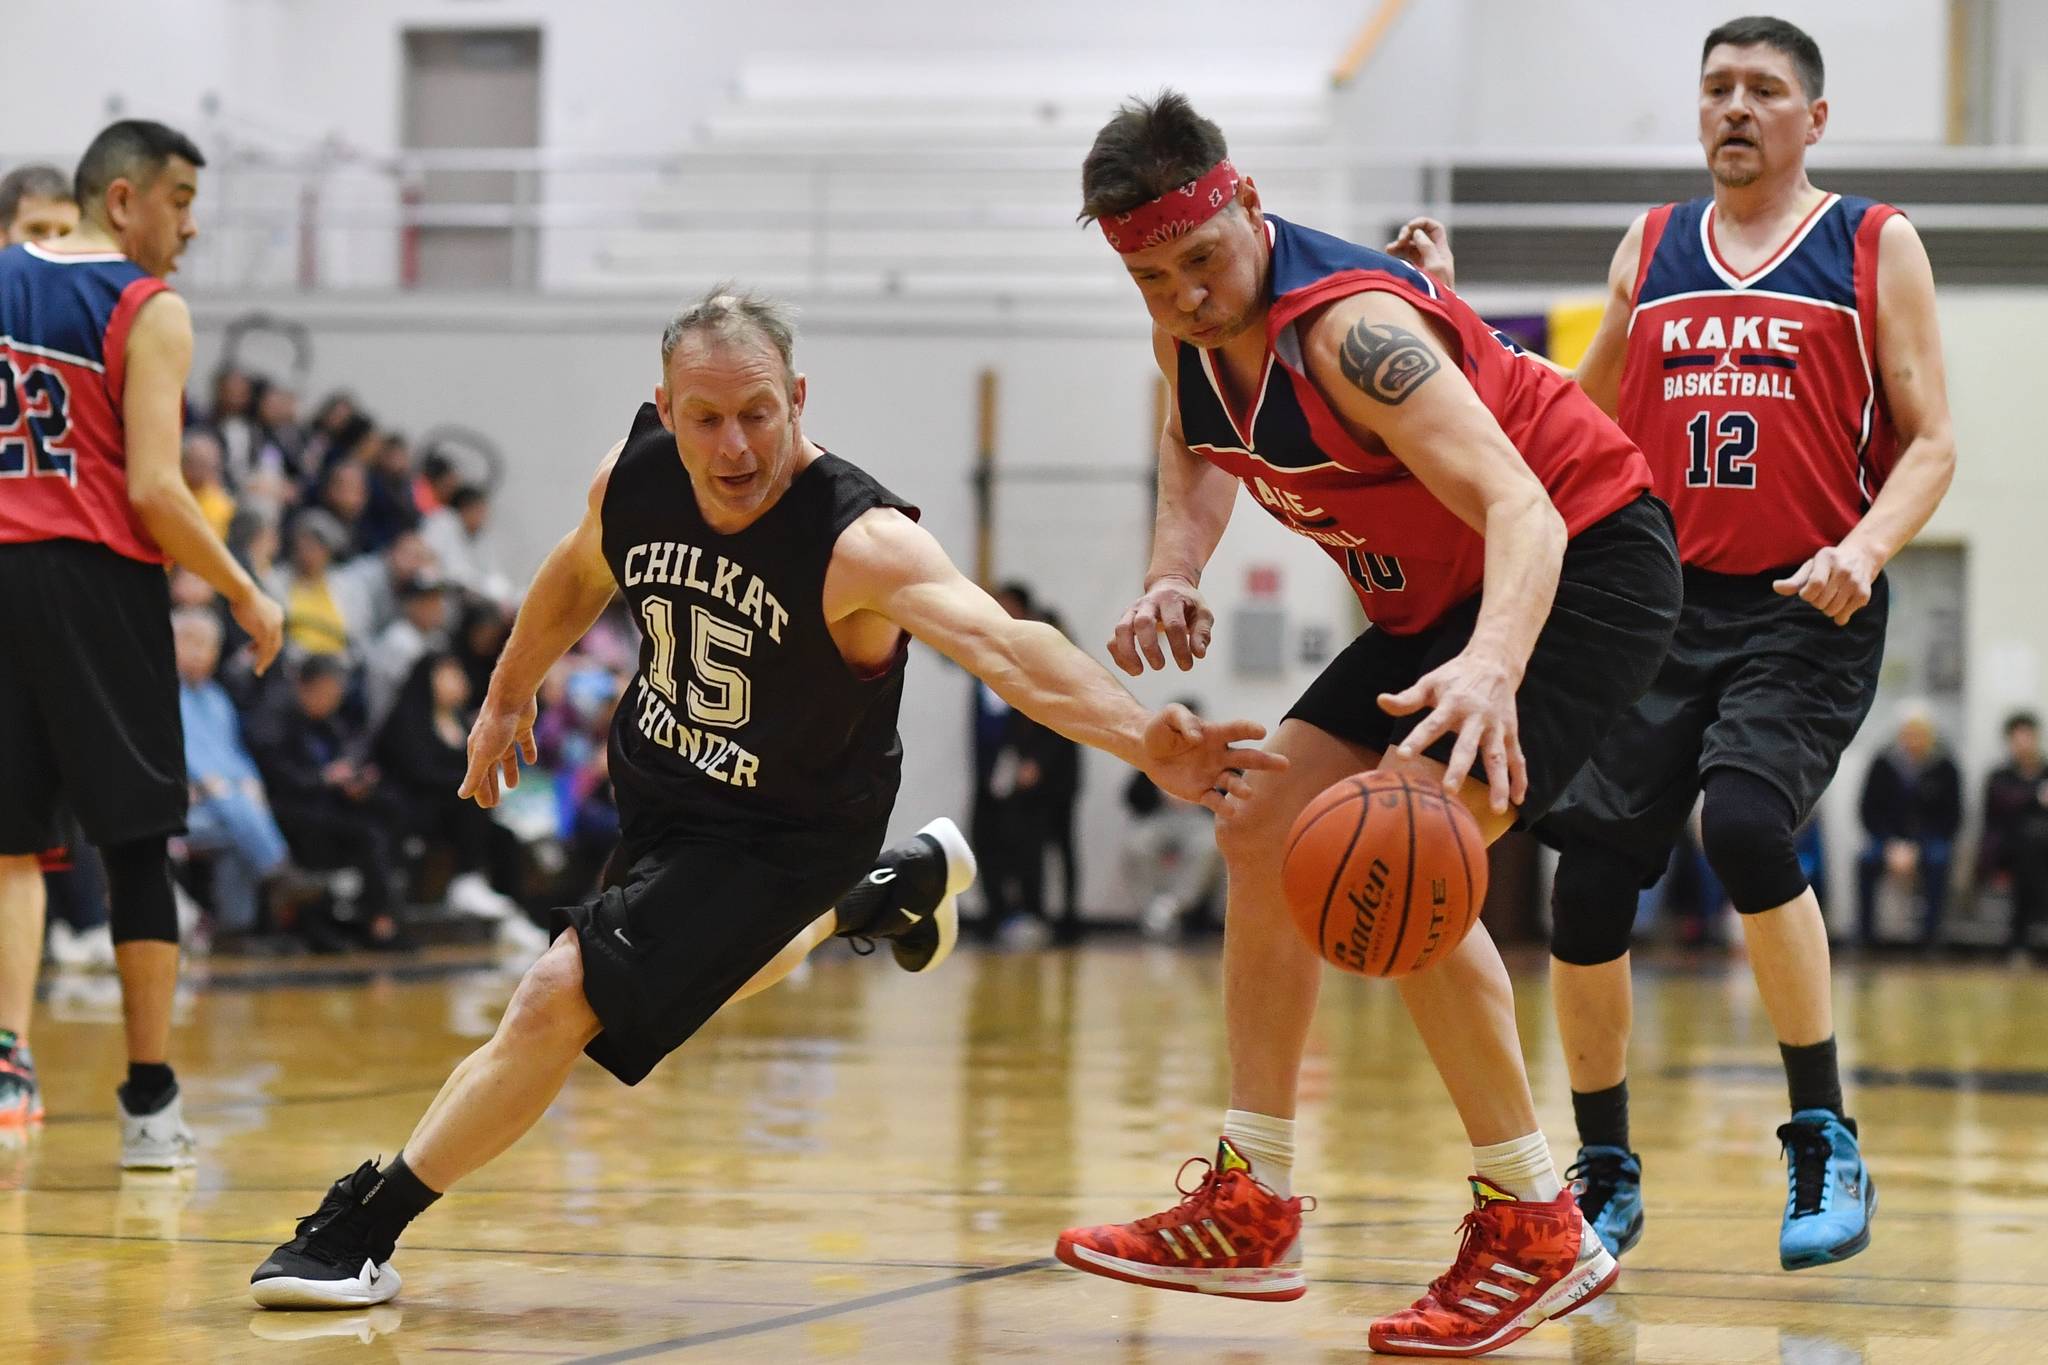 Kake’s Nick Davis, right, takes the ball away from Klukwan’s Pete Dohrn in the Masters final at the Gold Medal Basketball Tournament on Saturday, March 23, 2019. (Michael Penn | Juneau Empire)